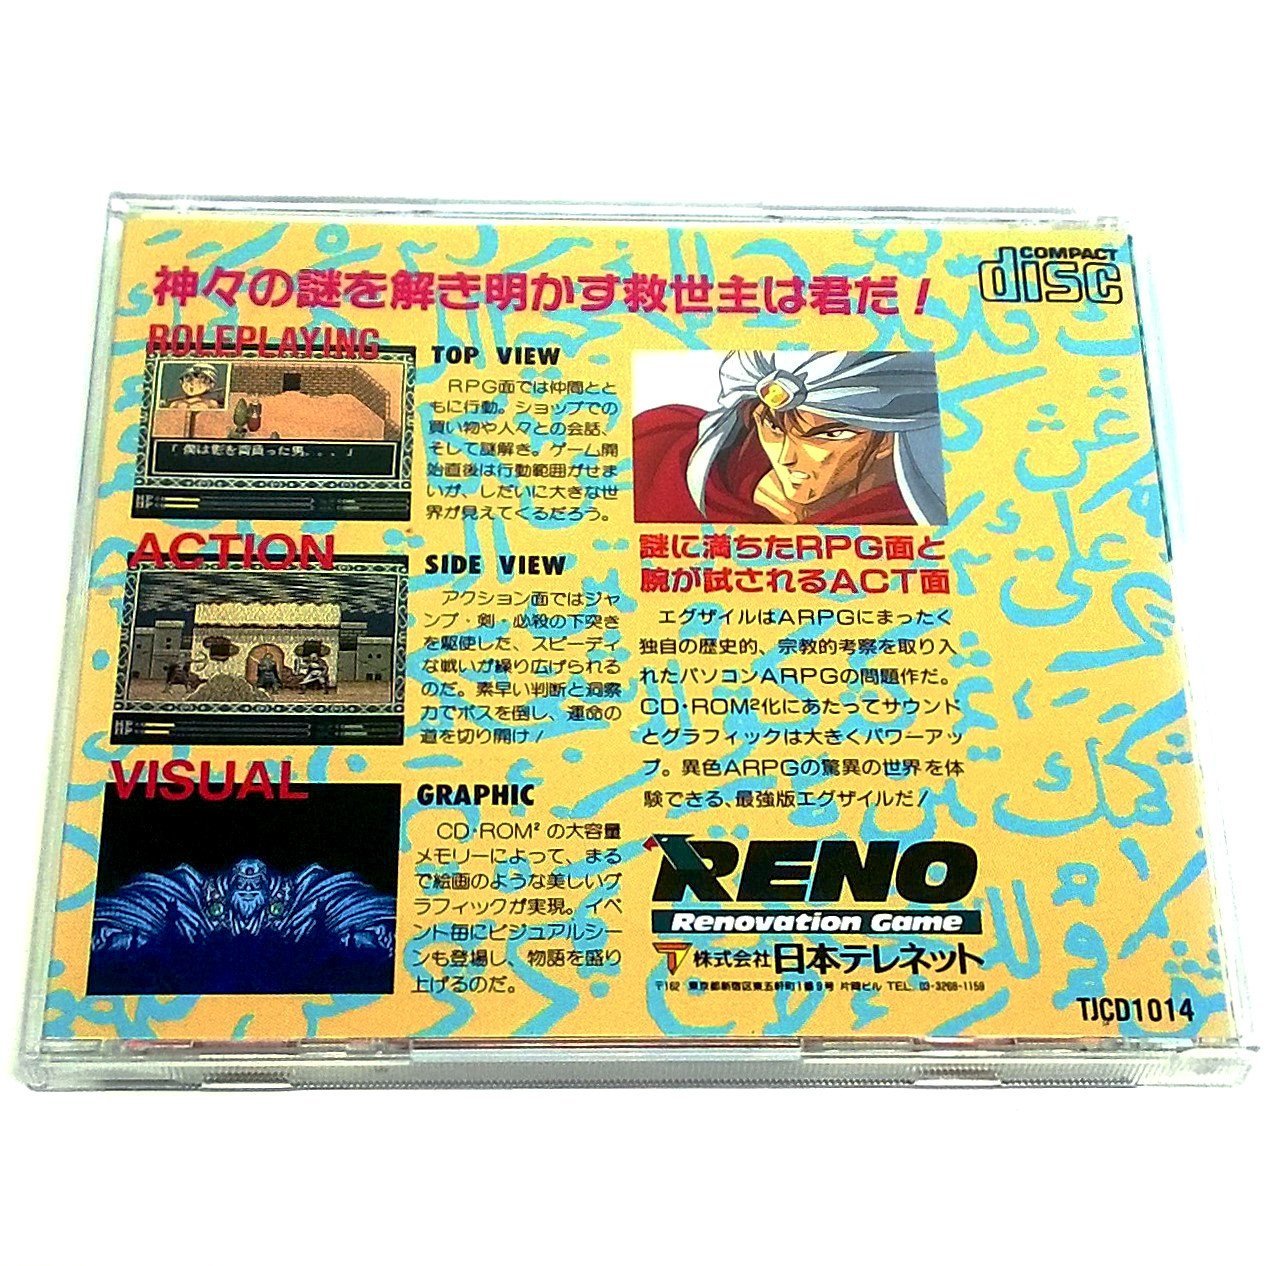 Exile for PC Engine - Back of case